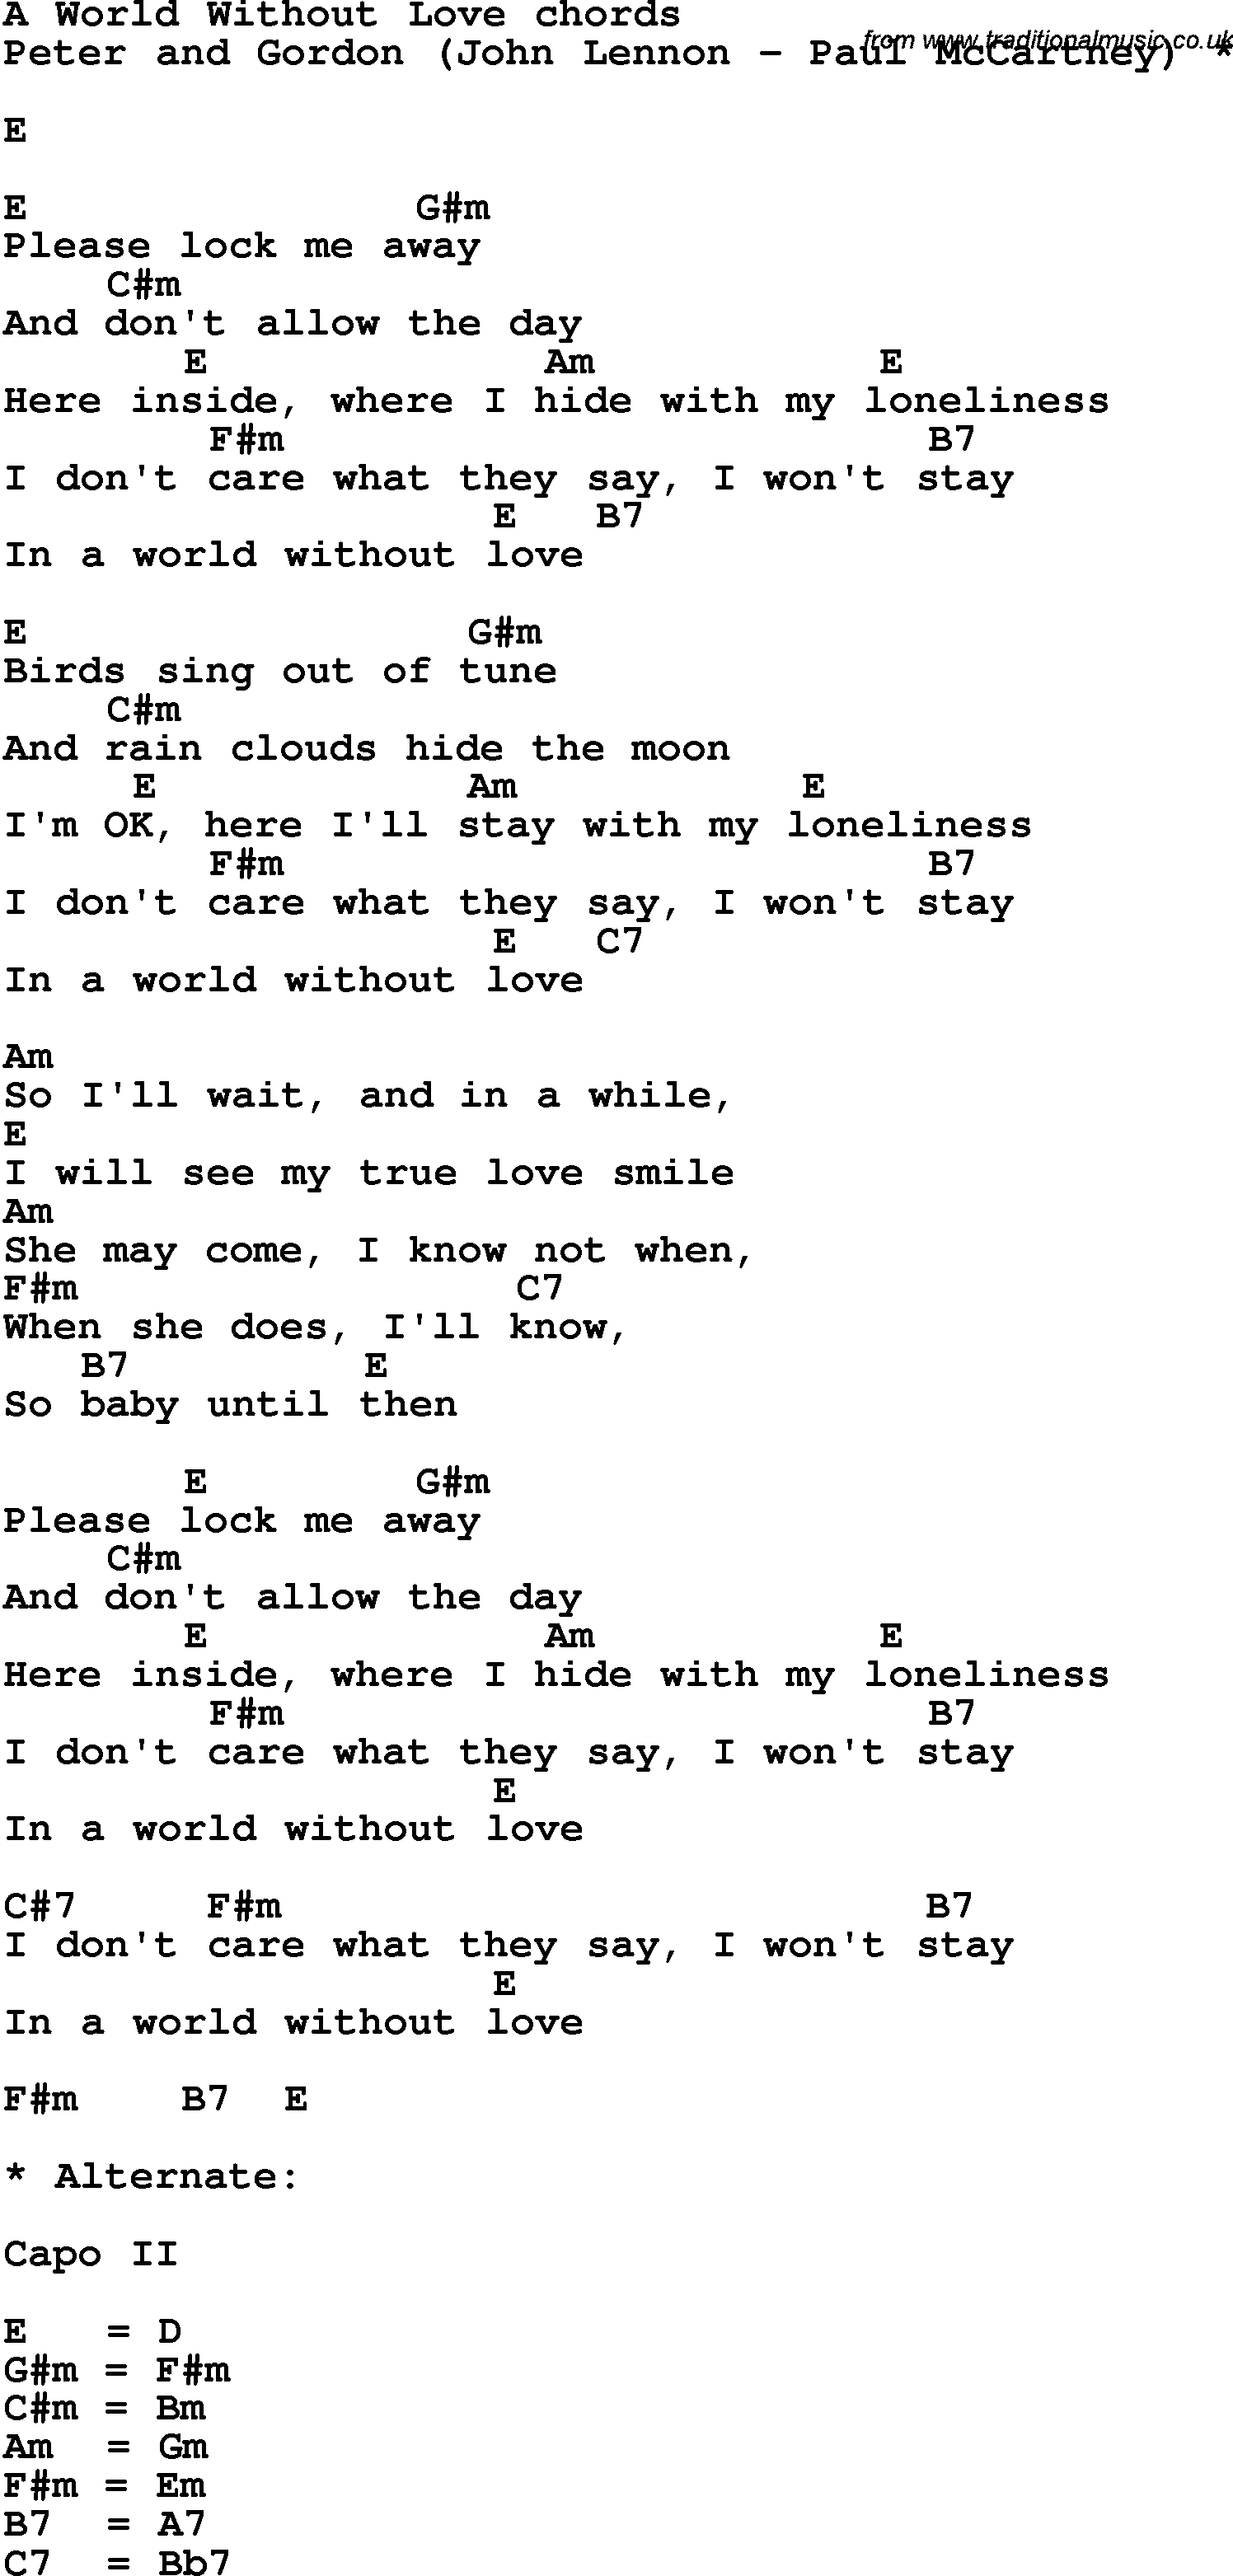 Song Lyrics with guitar chords for World Without Love